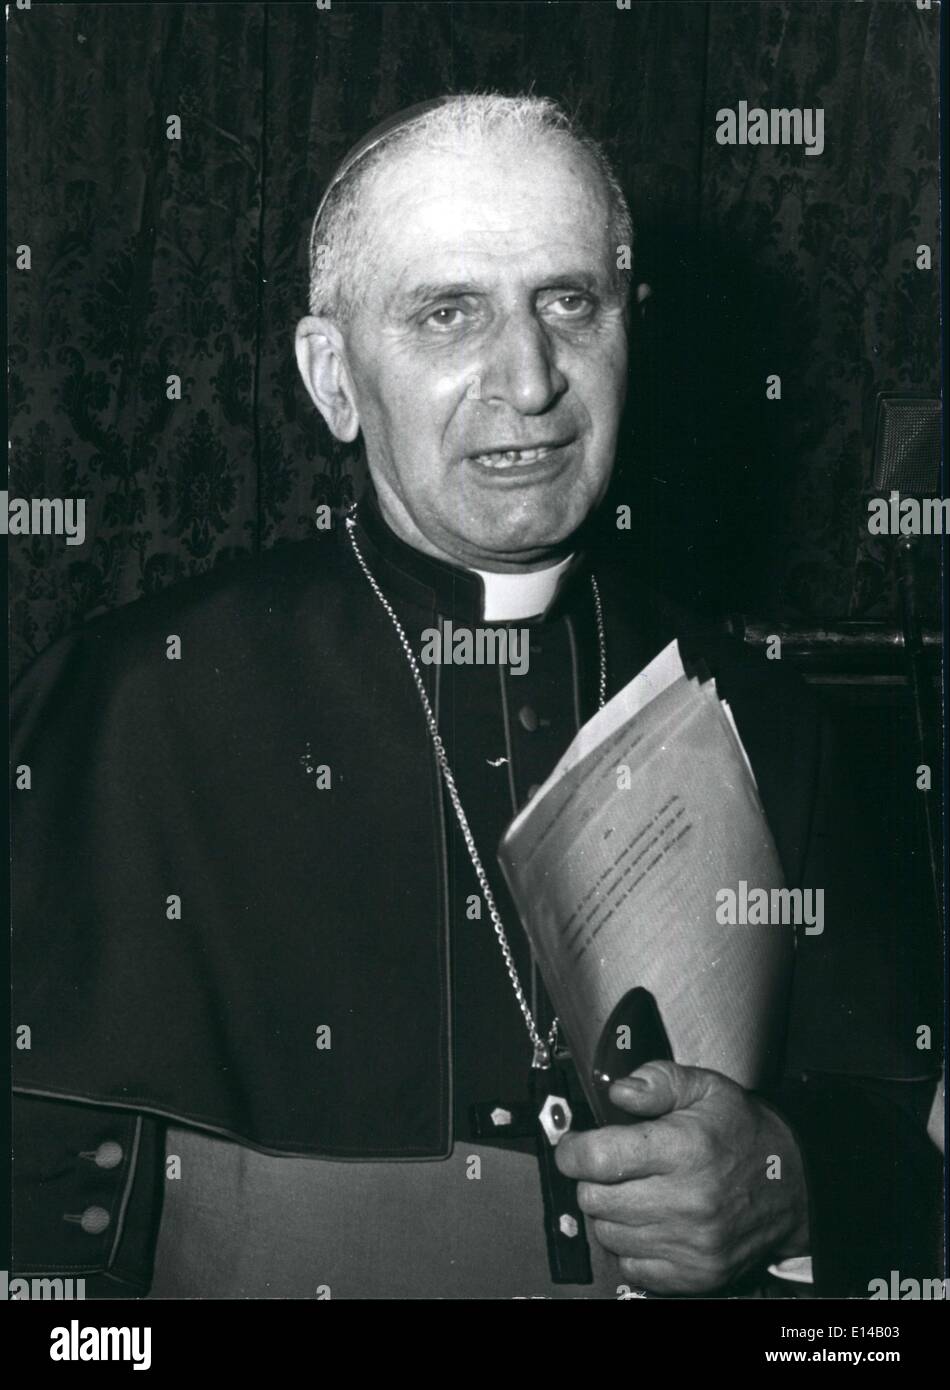 Apr. 17, 2012 - Rome, 15.3.74 = Dumors about the declarations of the archbishop of Turan Card. Michale Pellegrino, said something about the next referendum for yes of not to the law of divorce in Italy. Photo shows Card. Michele Pellegrino. Stock Photo